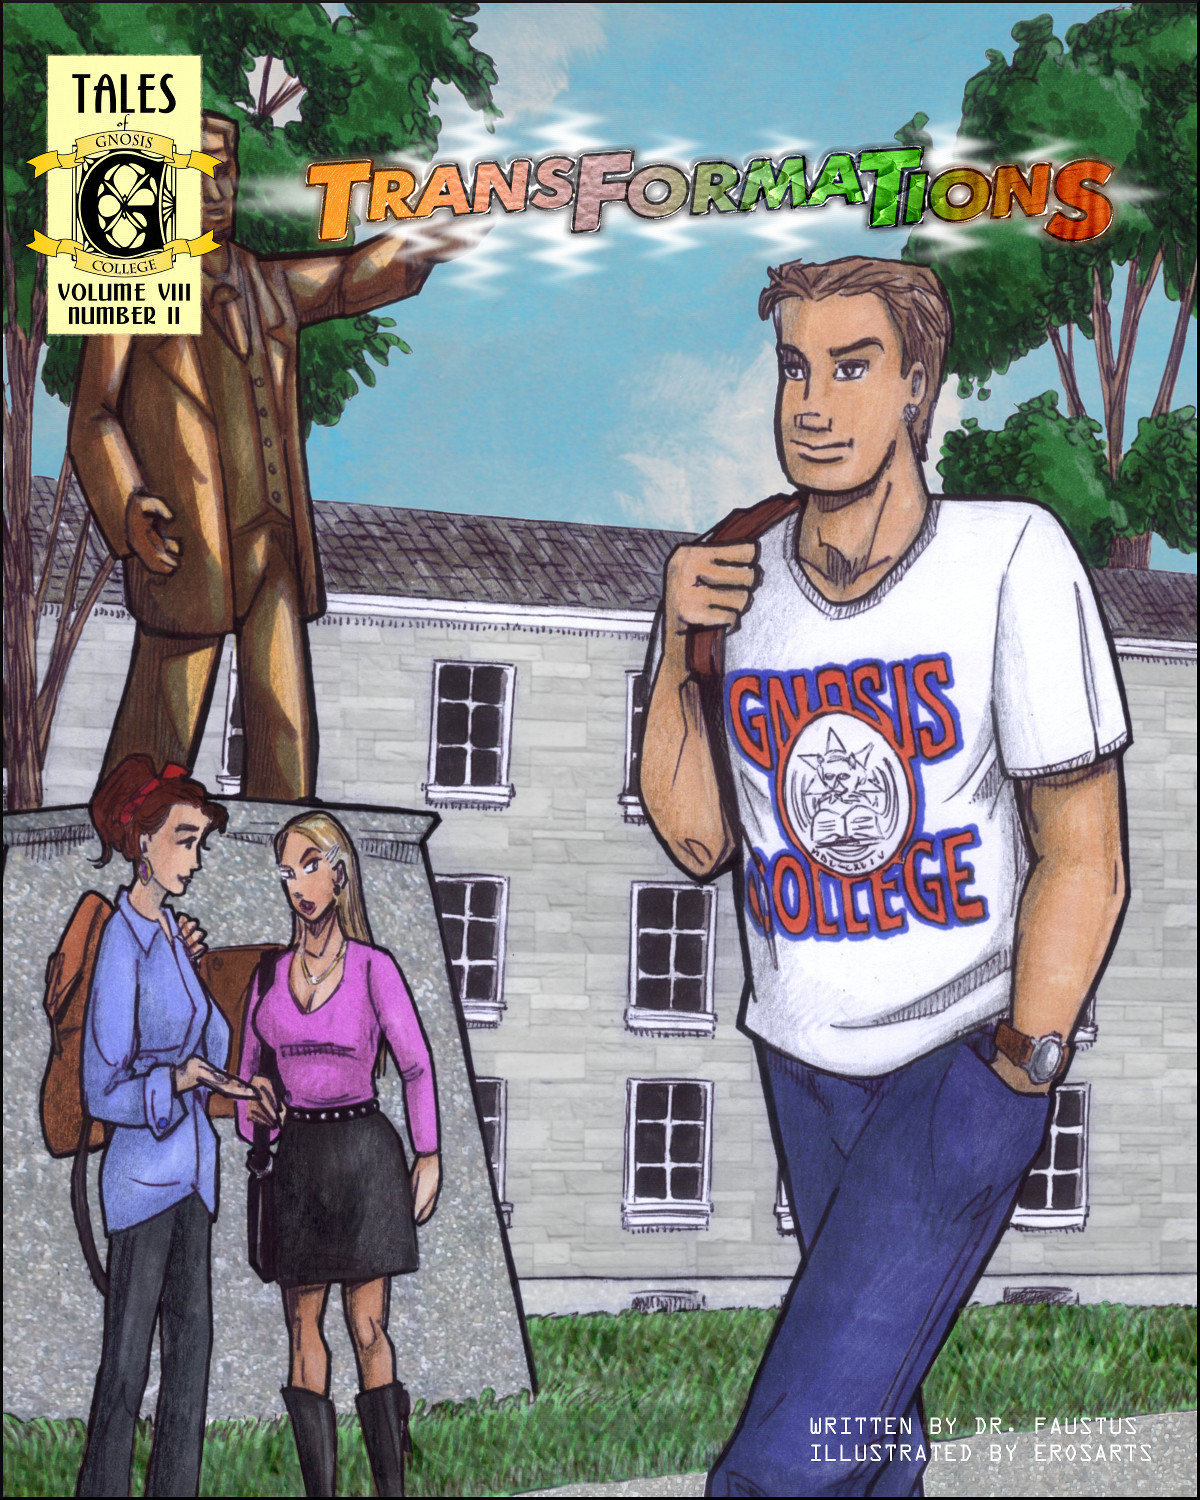 Taylor Chase strides proudly across the Gnosis College campus, while Marie Martin eyes him from a distance.